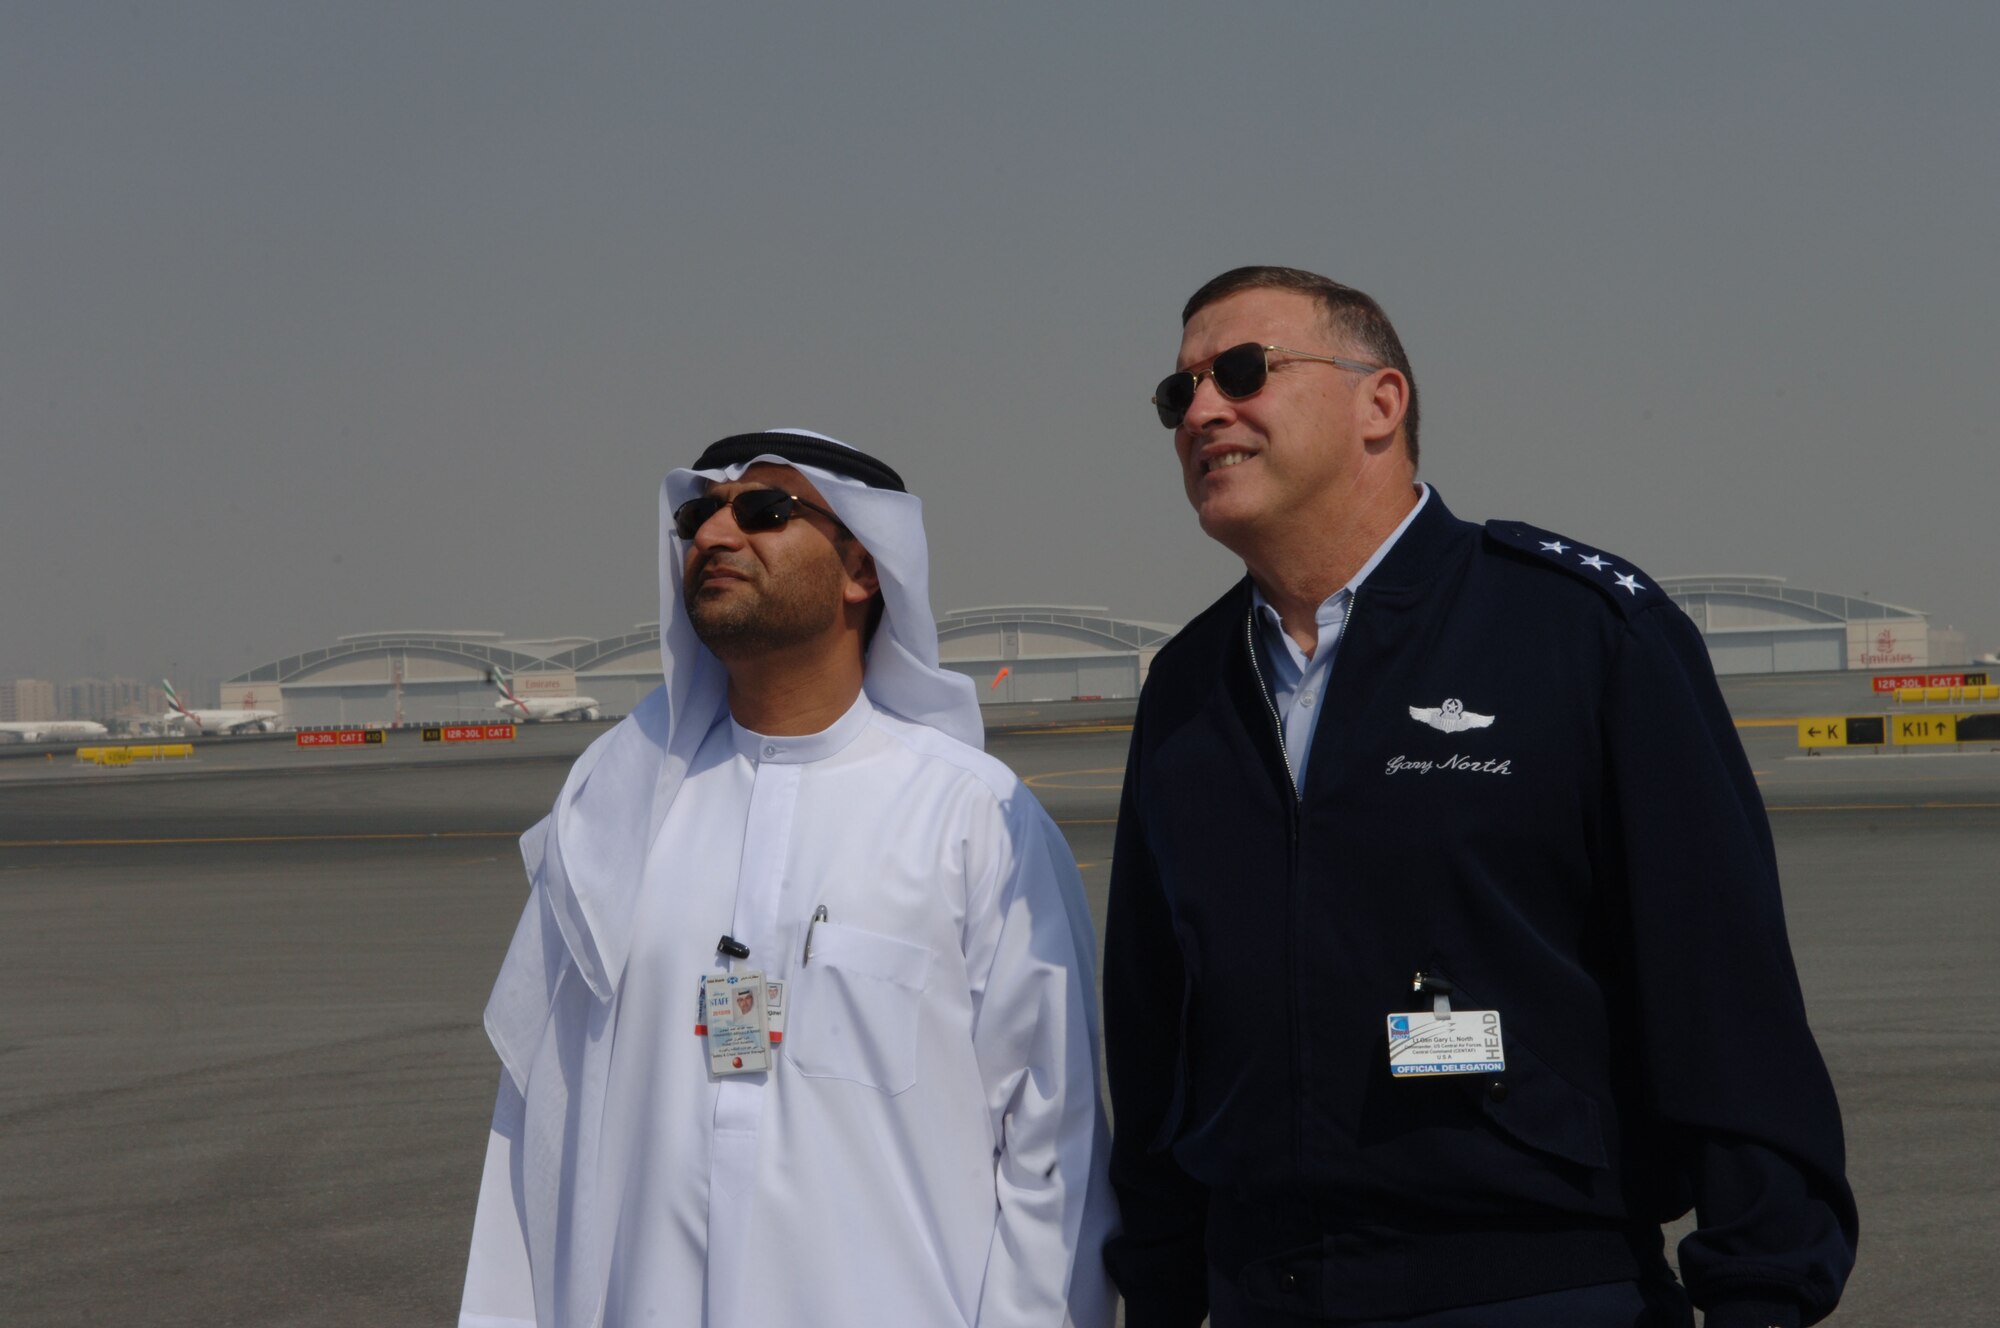 Mohammed A. Lengawi, General Manager of Airport safety and Crisis management for the government of Dubai, gives Lt. Gen. Gary North, commander of 9th Air Force and U.S. Central Command Air Forces, a tour of the Mobil Incident Command Center used by the Government of Dubai's Department of Civil Aviation.  The MICC is a state of the art facility and is on stand-by in case of any emergency that may arise during the Dubai Air Show. Approximately 250 Airman, Soldiers and Sailors, and various Air Force and Navy aircraft from bases in the Persian Gulf region and  the United States are supporting the air show from Nov 11-15 2007.   The United States military is a long-standing participant in the biennial Dubai Air Show.  (Air Force Photo by Tech. Sgt. Charlein C. Sheets)